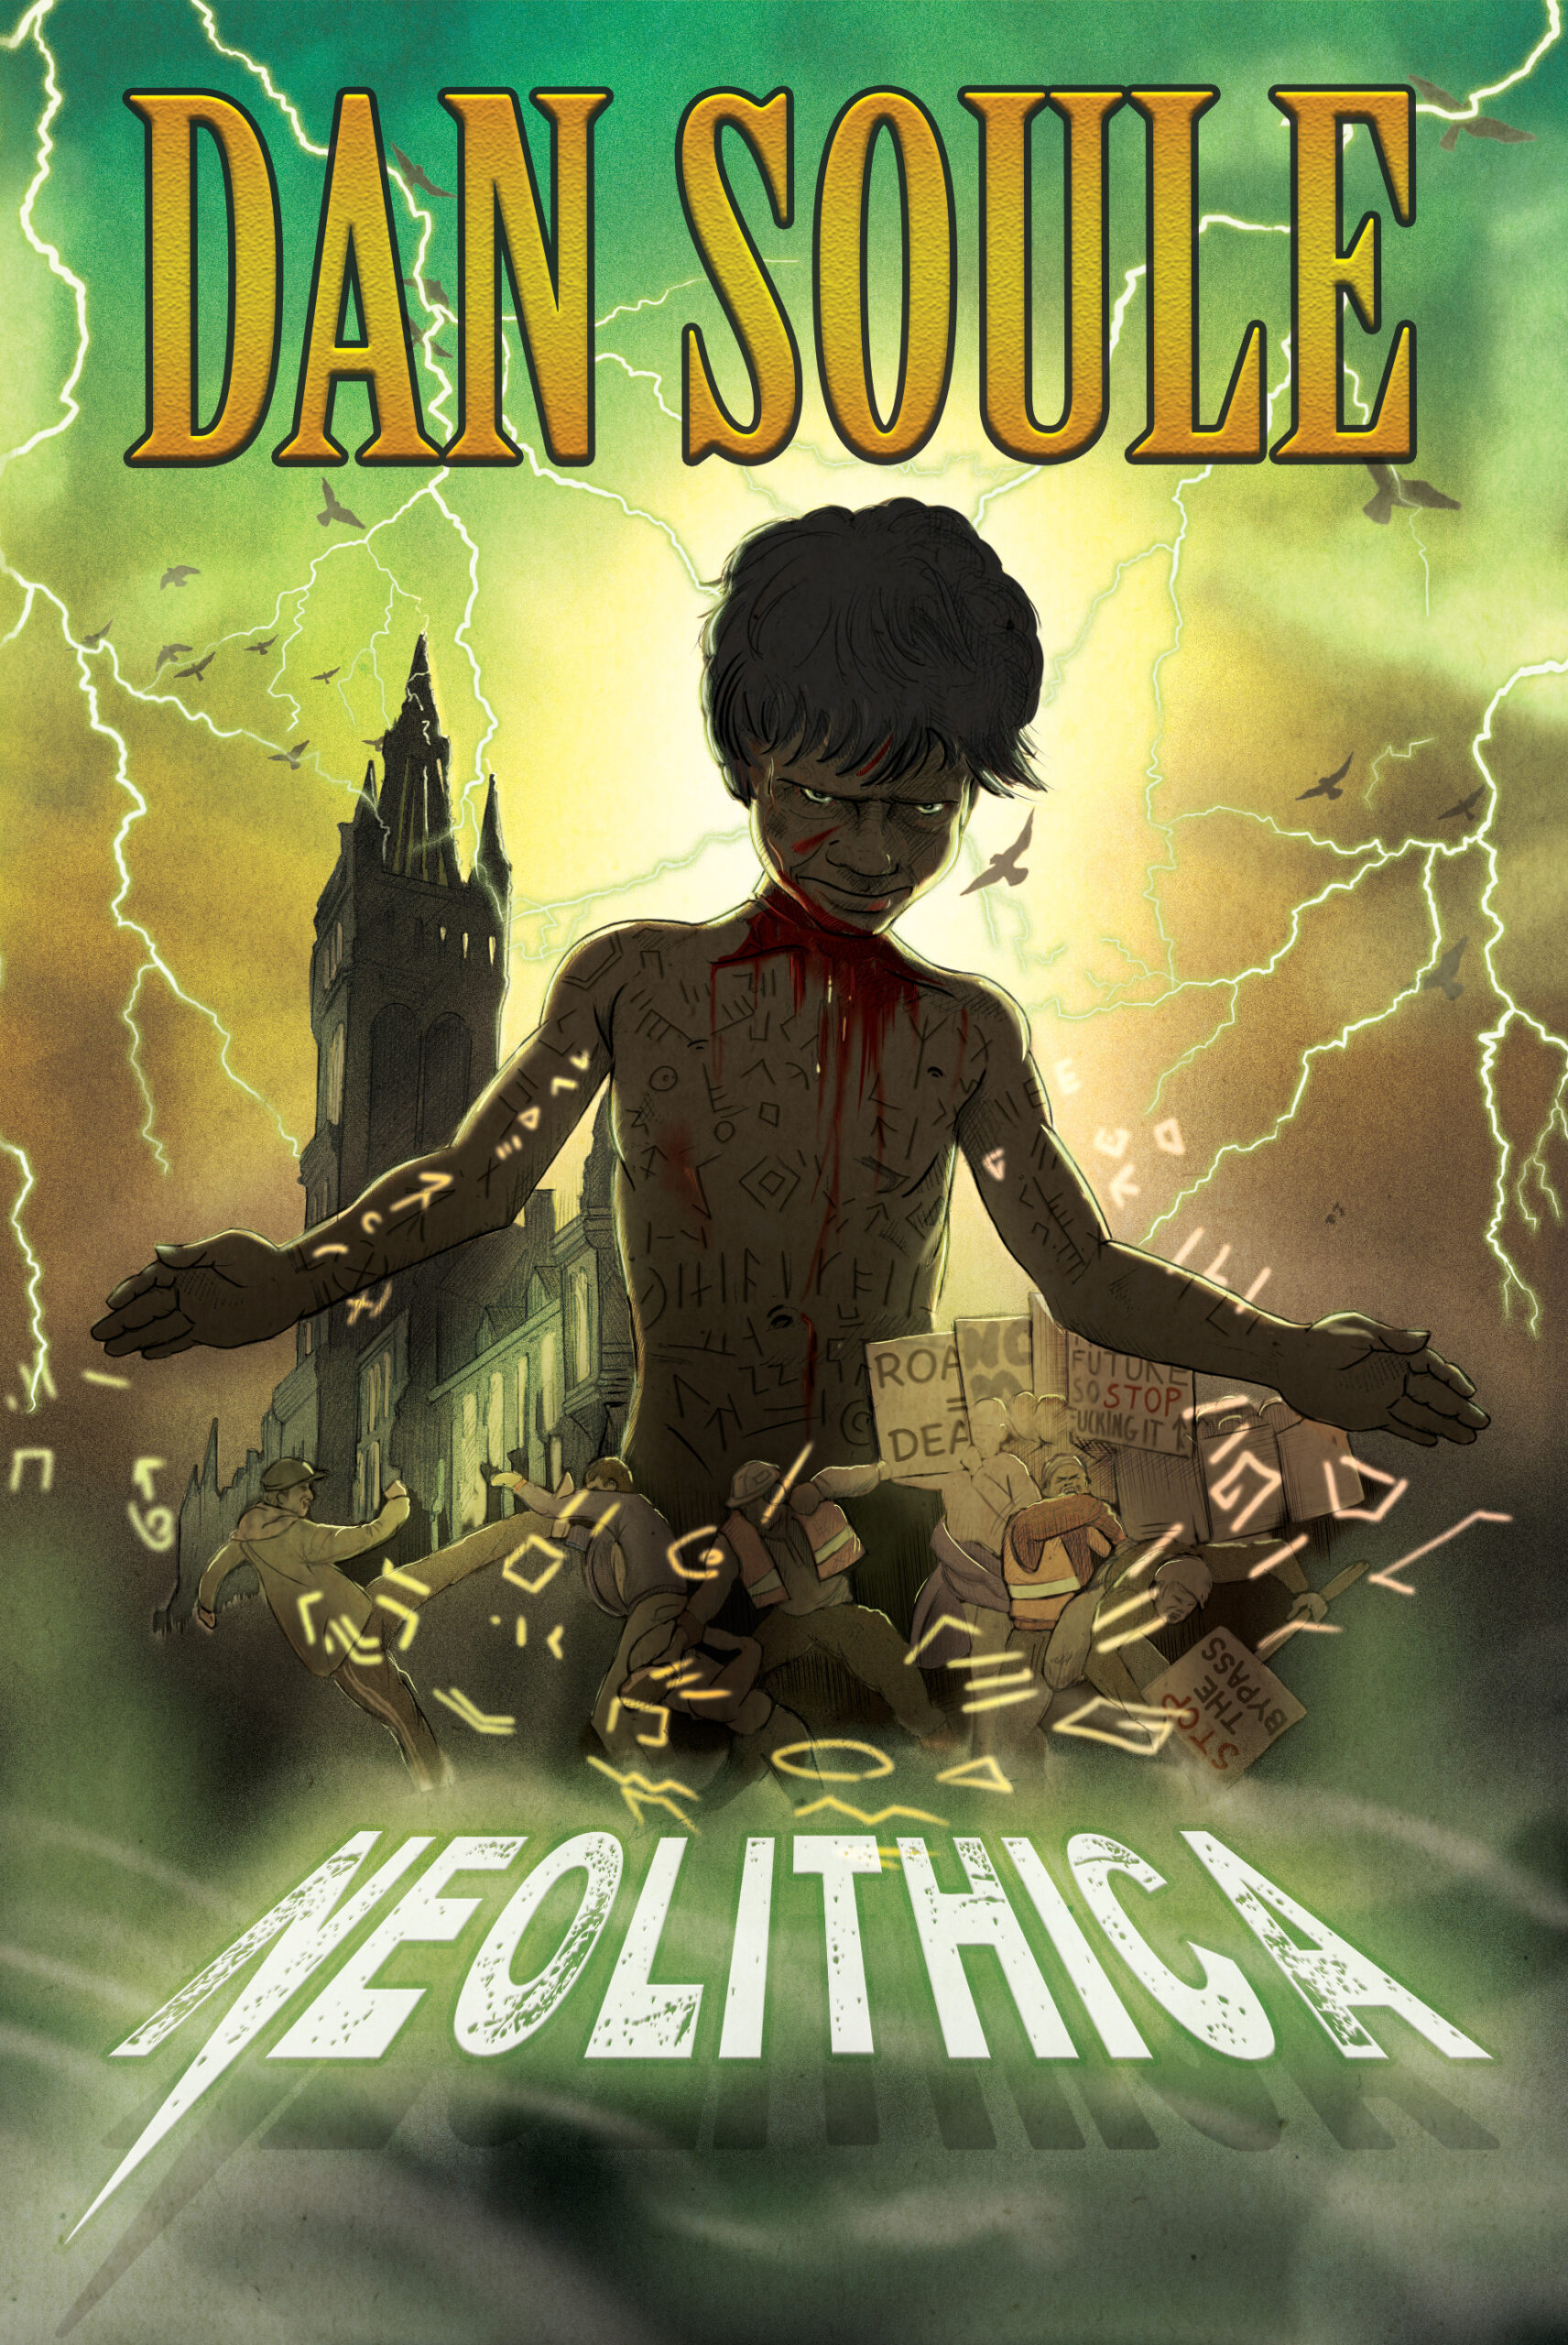 Try it before you buy it: WITCHOPPER novel preview - Writer Dan Soule